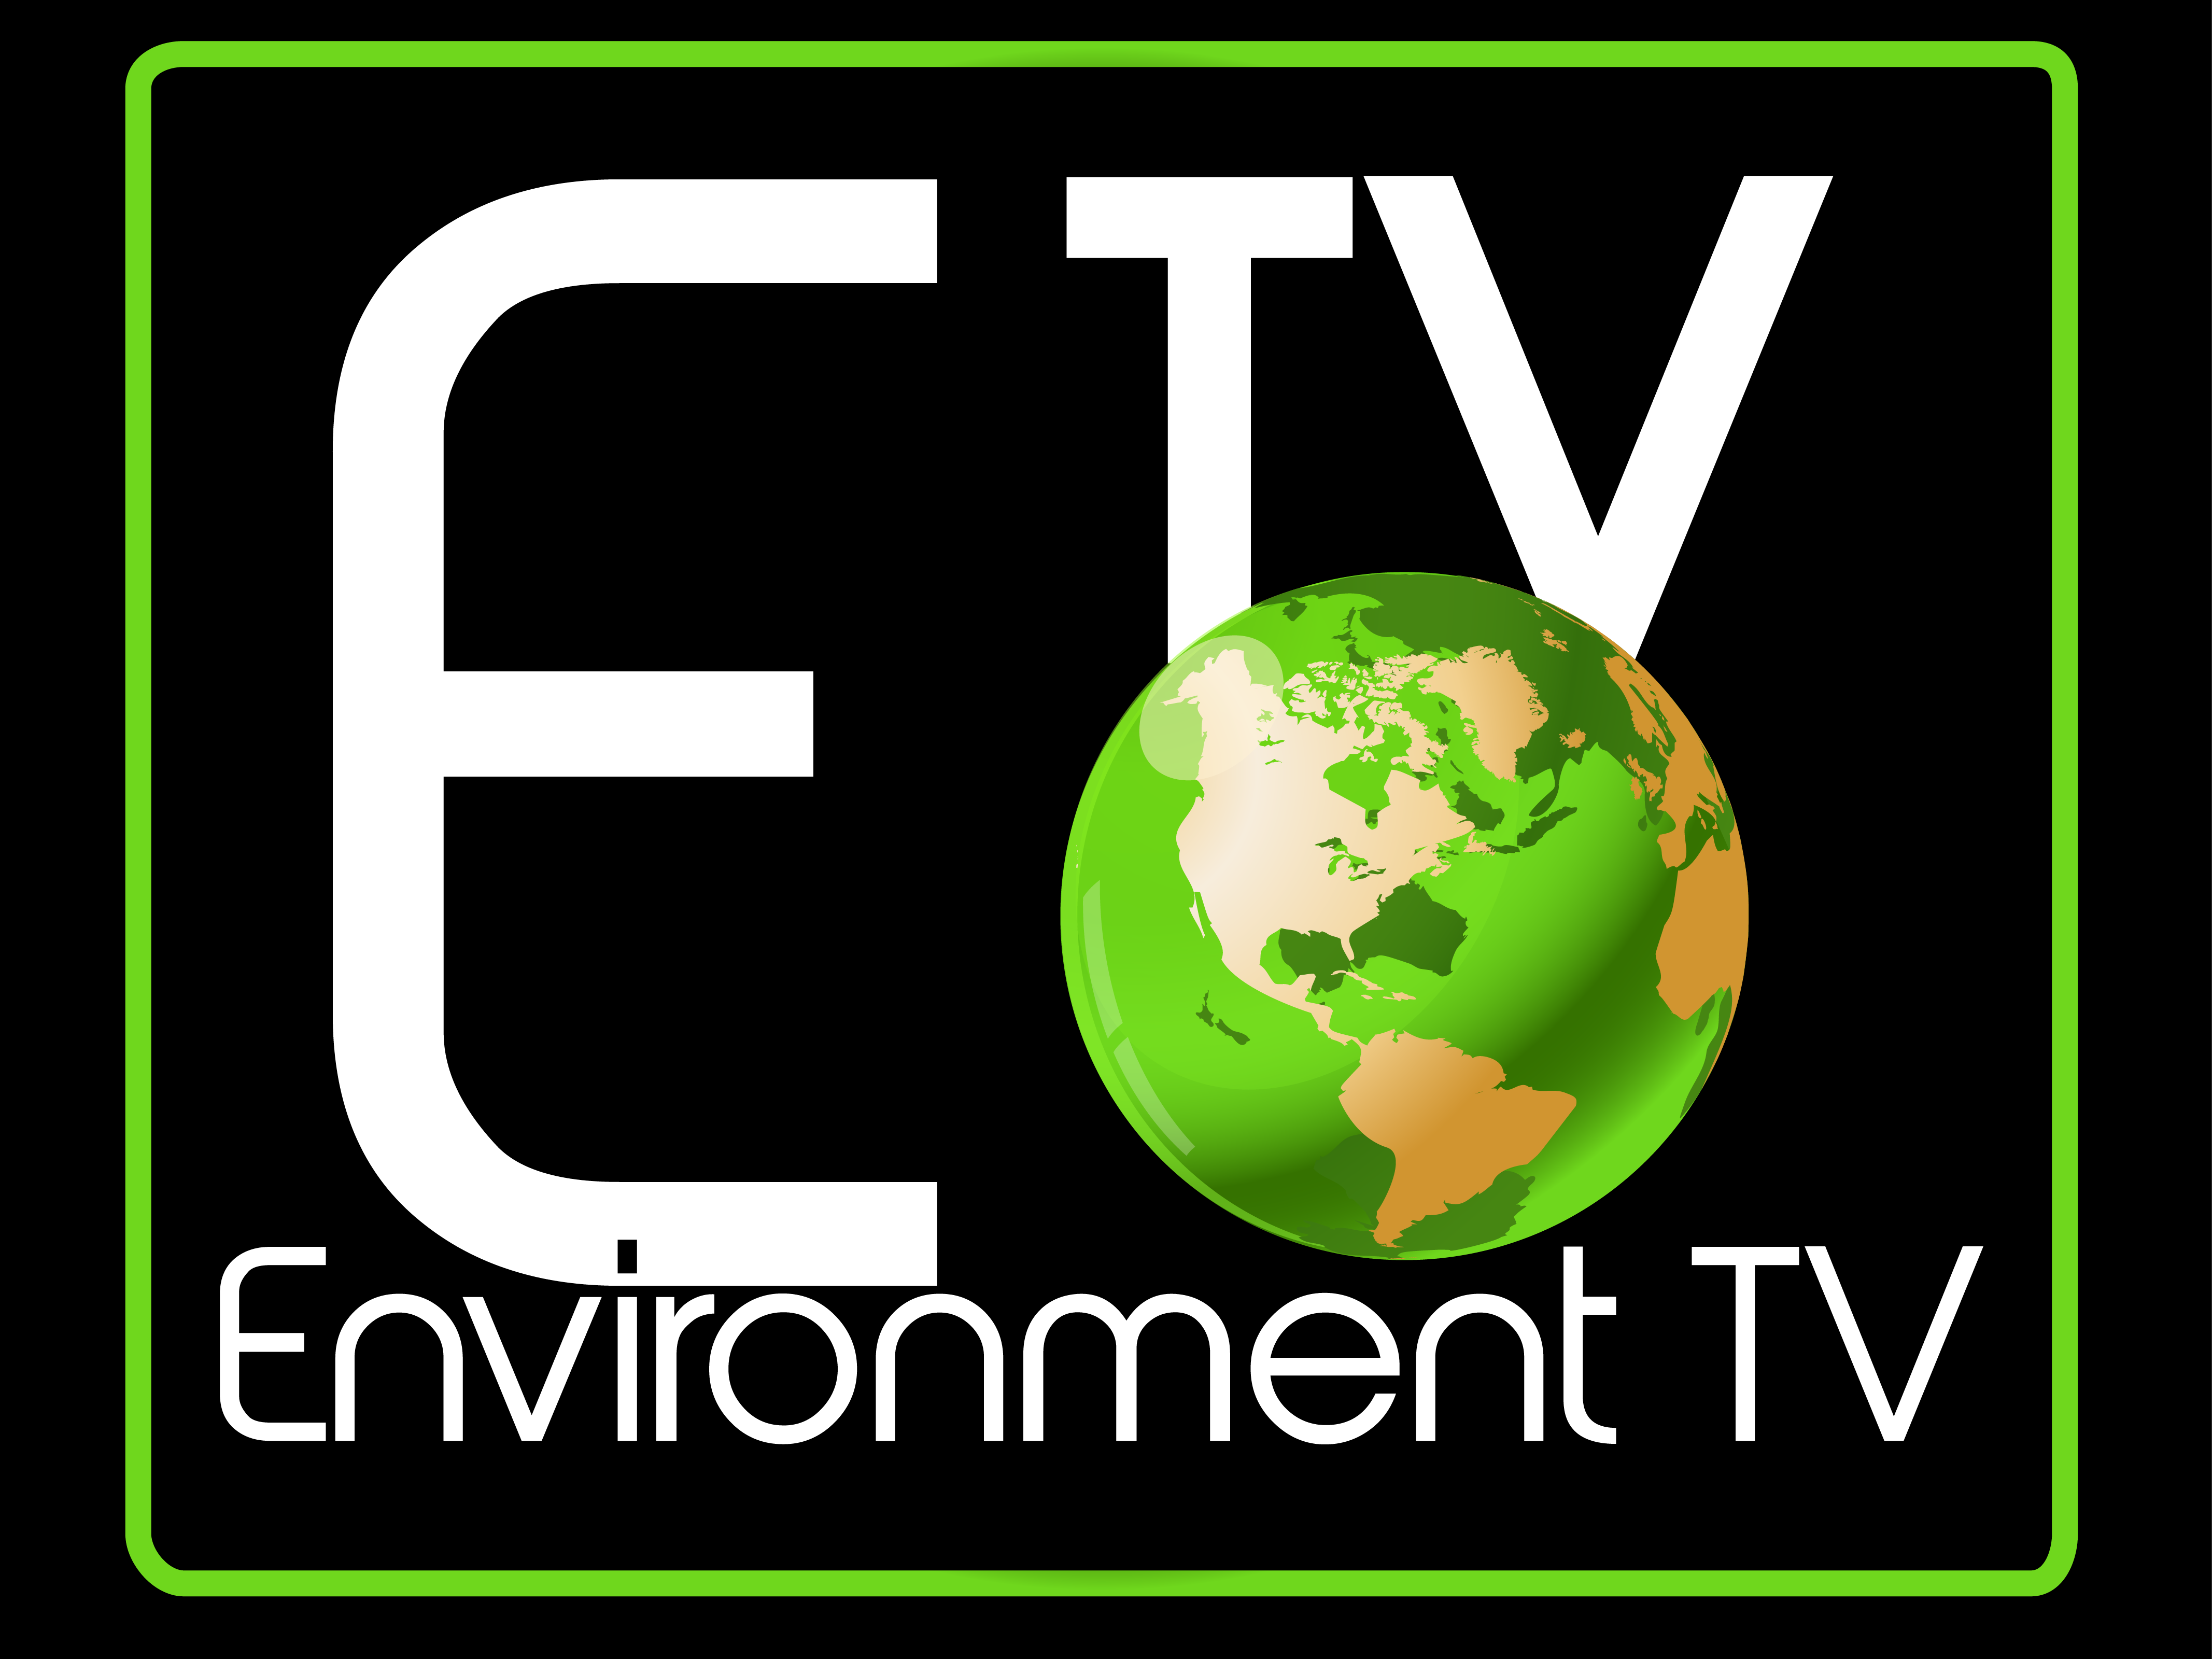 The Environment TV